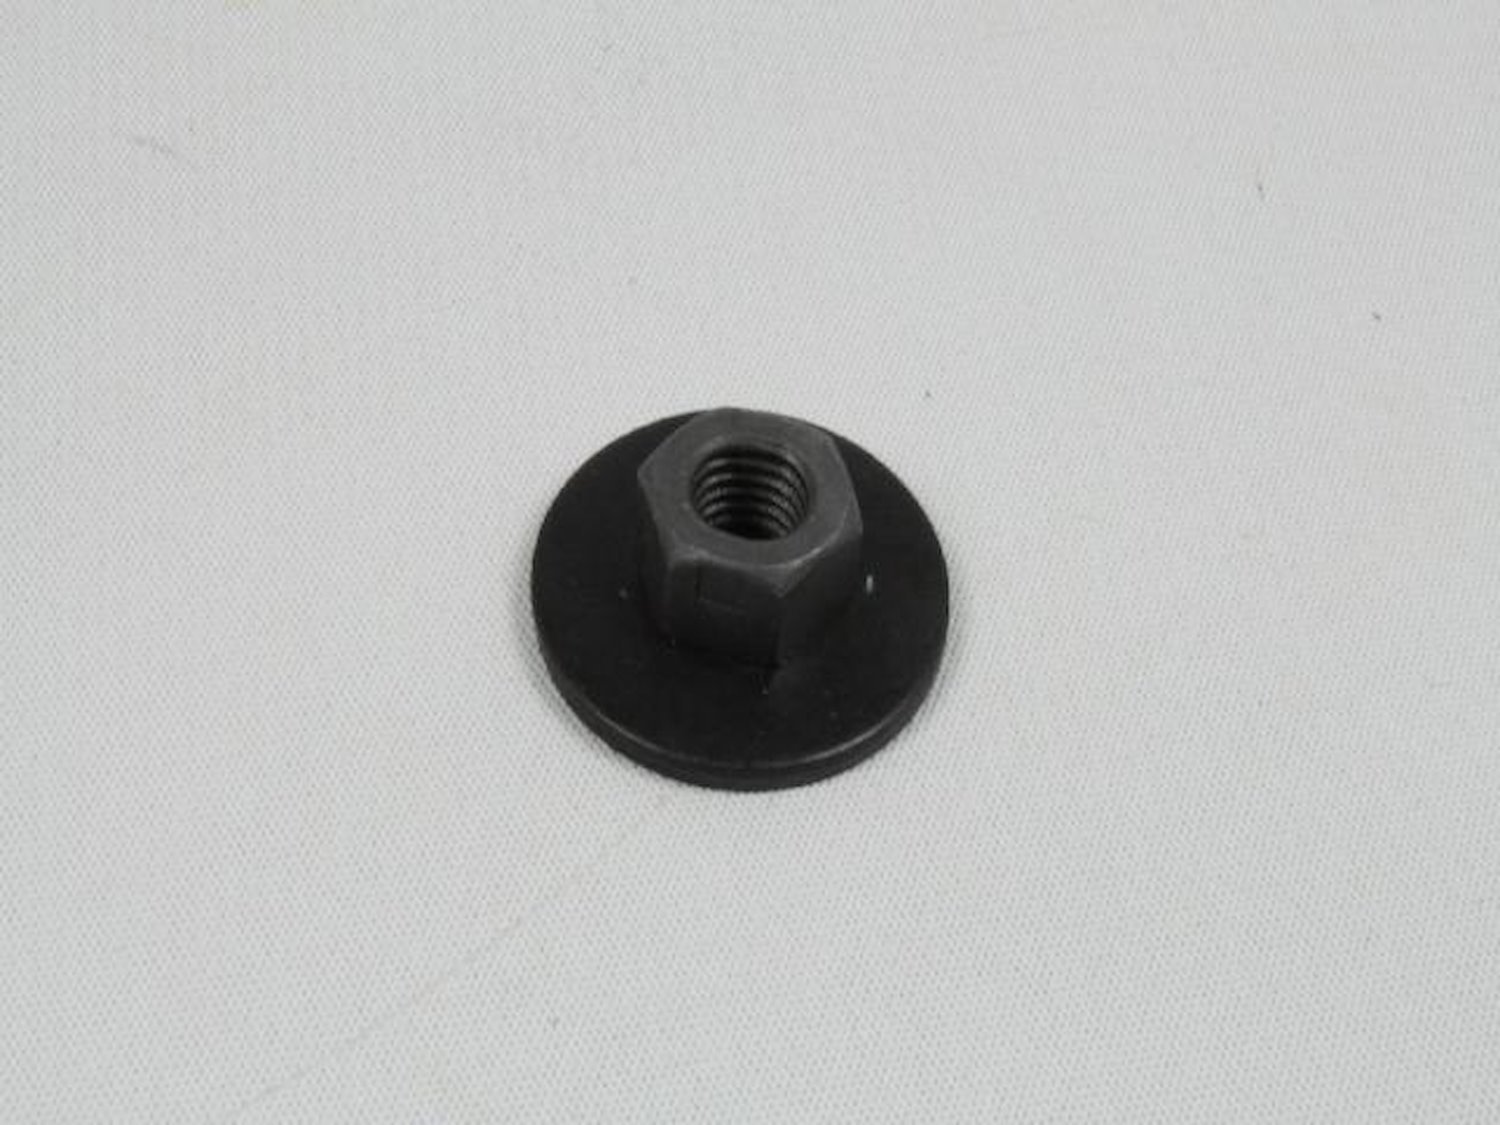 NUT HEX LOCK CONED WASHER